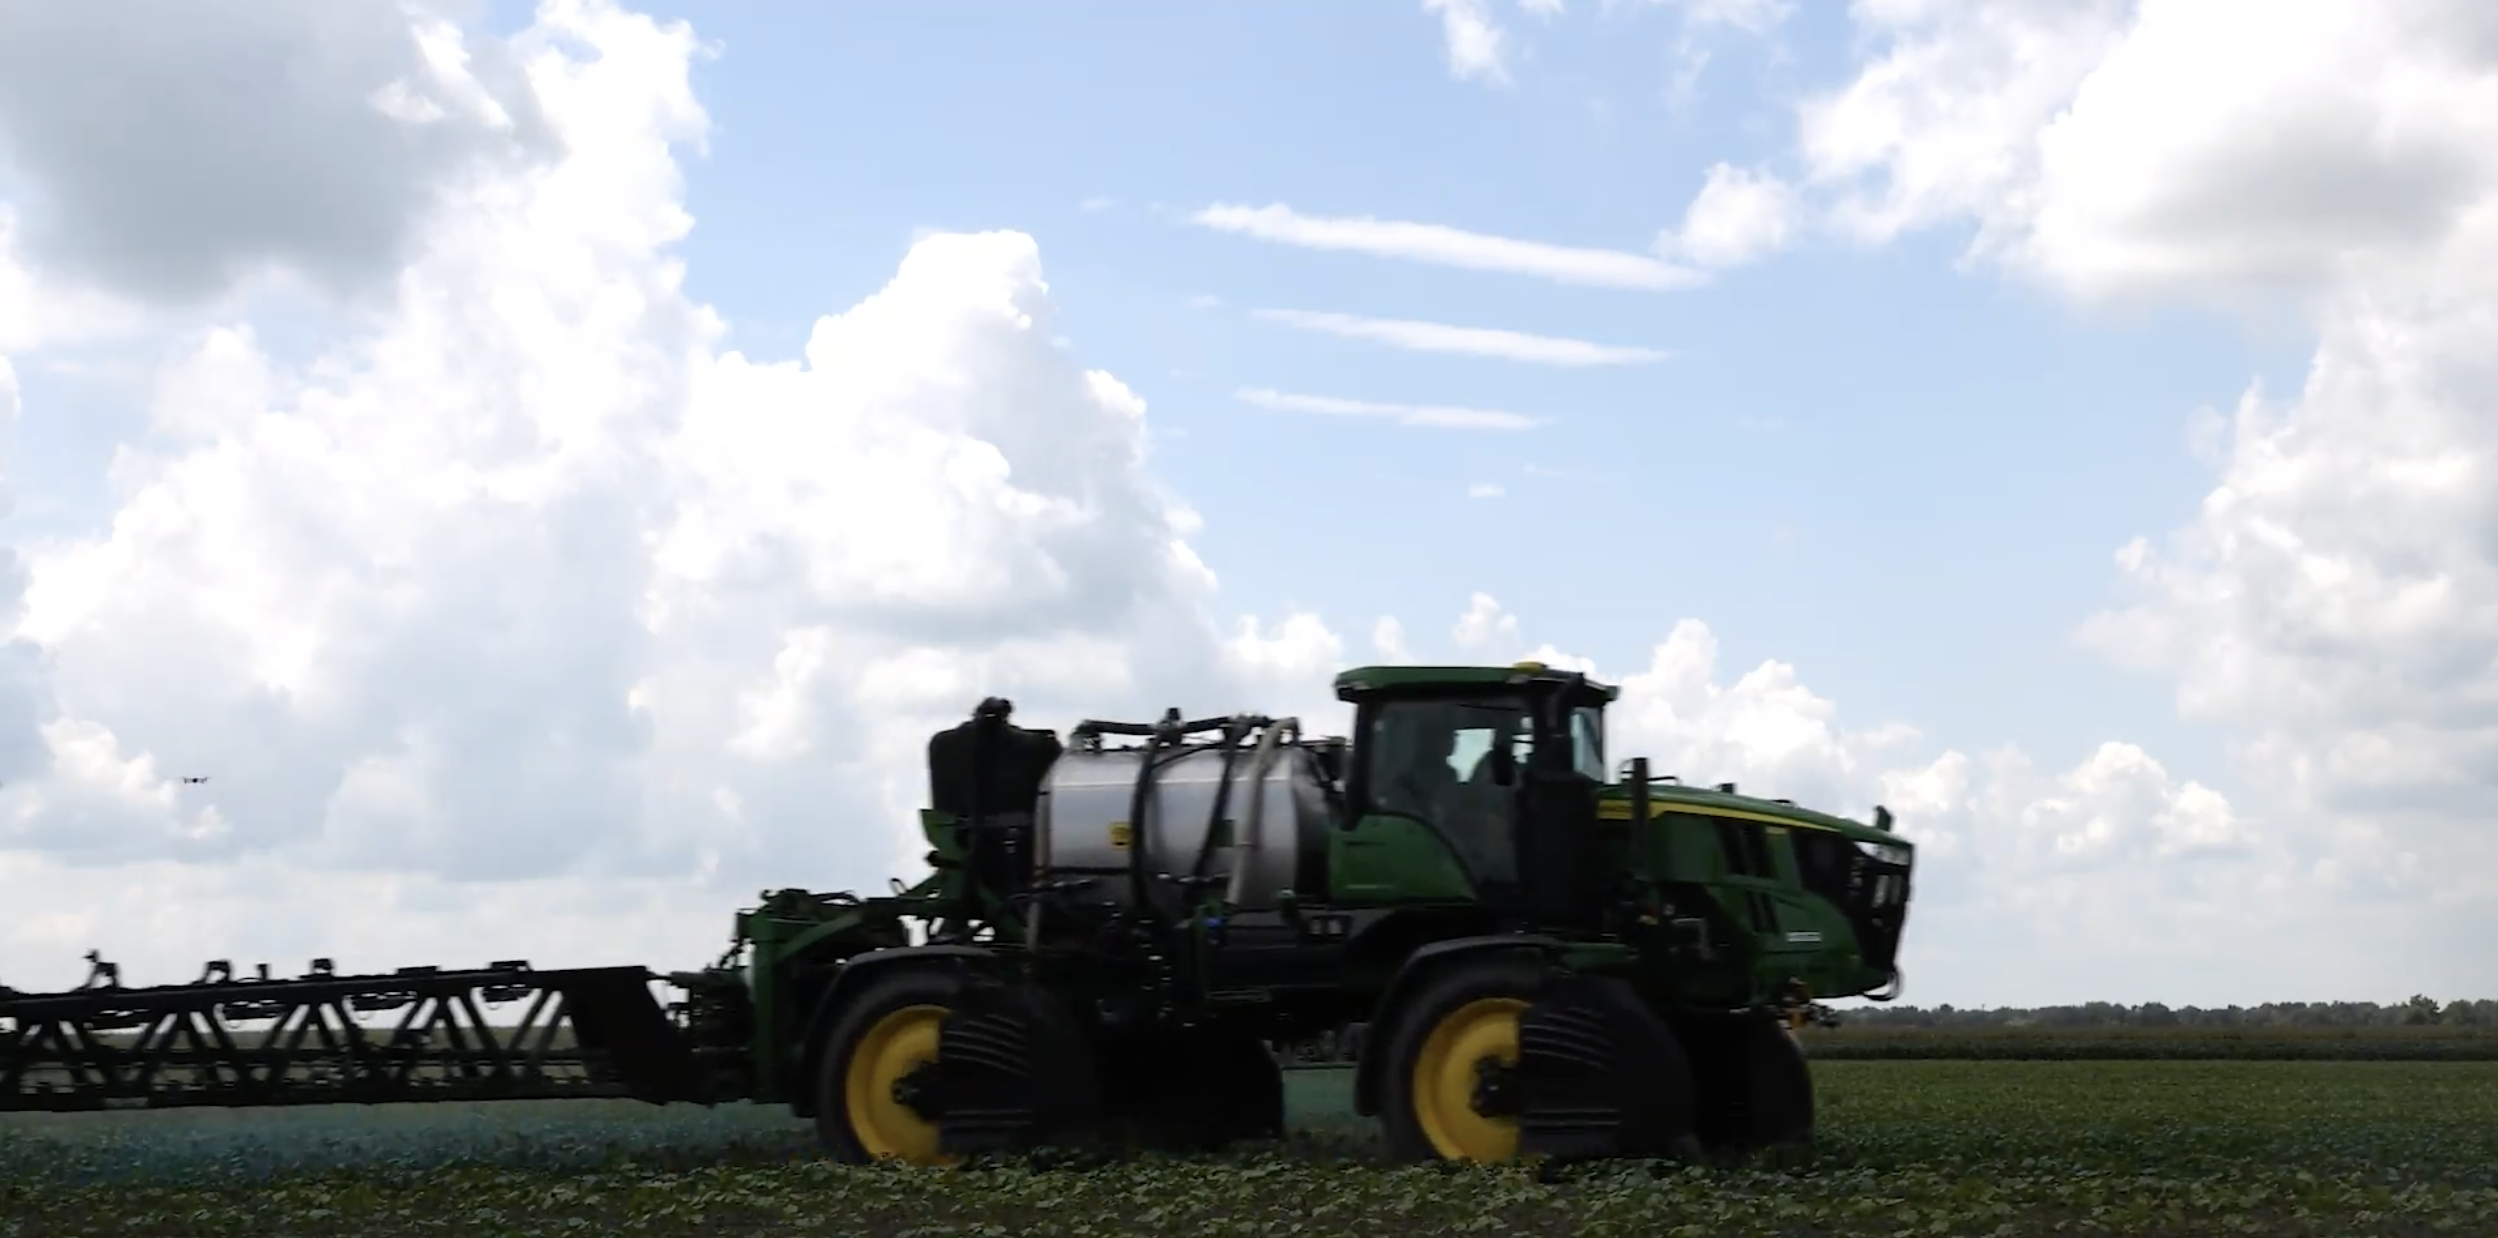 The 412R John Deere See & Spray Ultimate sprays water, dyed blue, in a demonstration of the sprayer distinguishing weeds from crops, in Keiser, Ark.